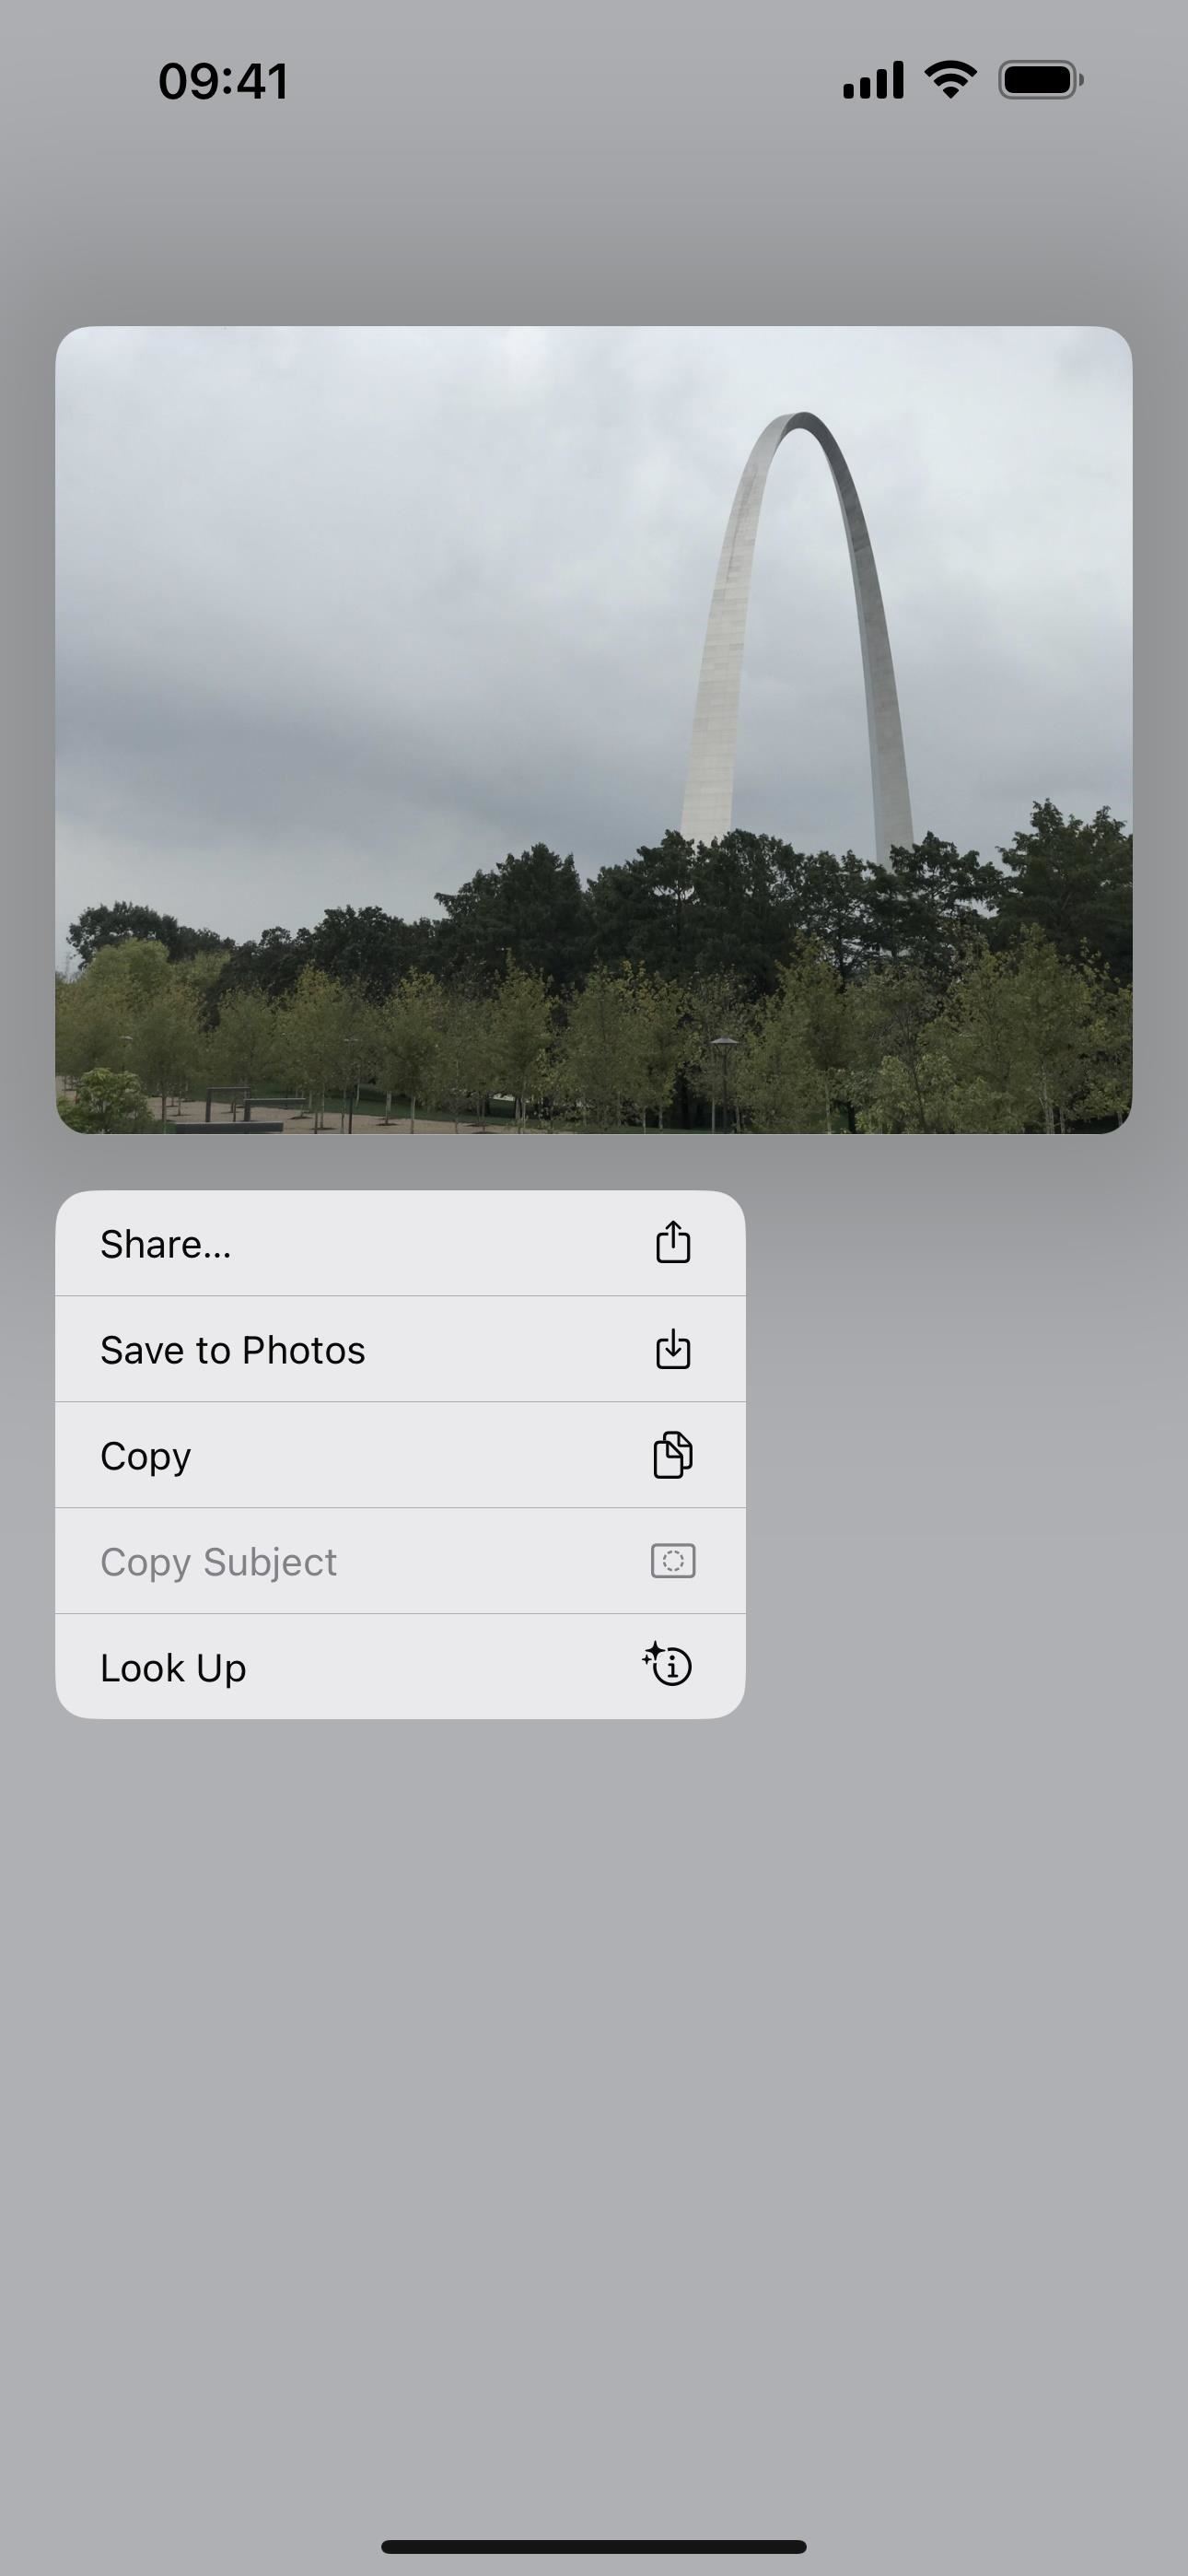 Use Your iPhone's Built-in Image Analyzer to Reveal the Hidden Meaning Behind Symbols, Signs, and More